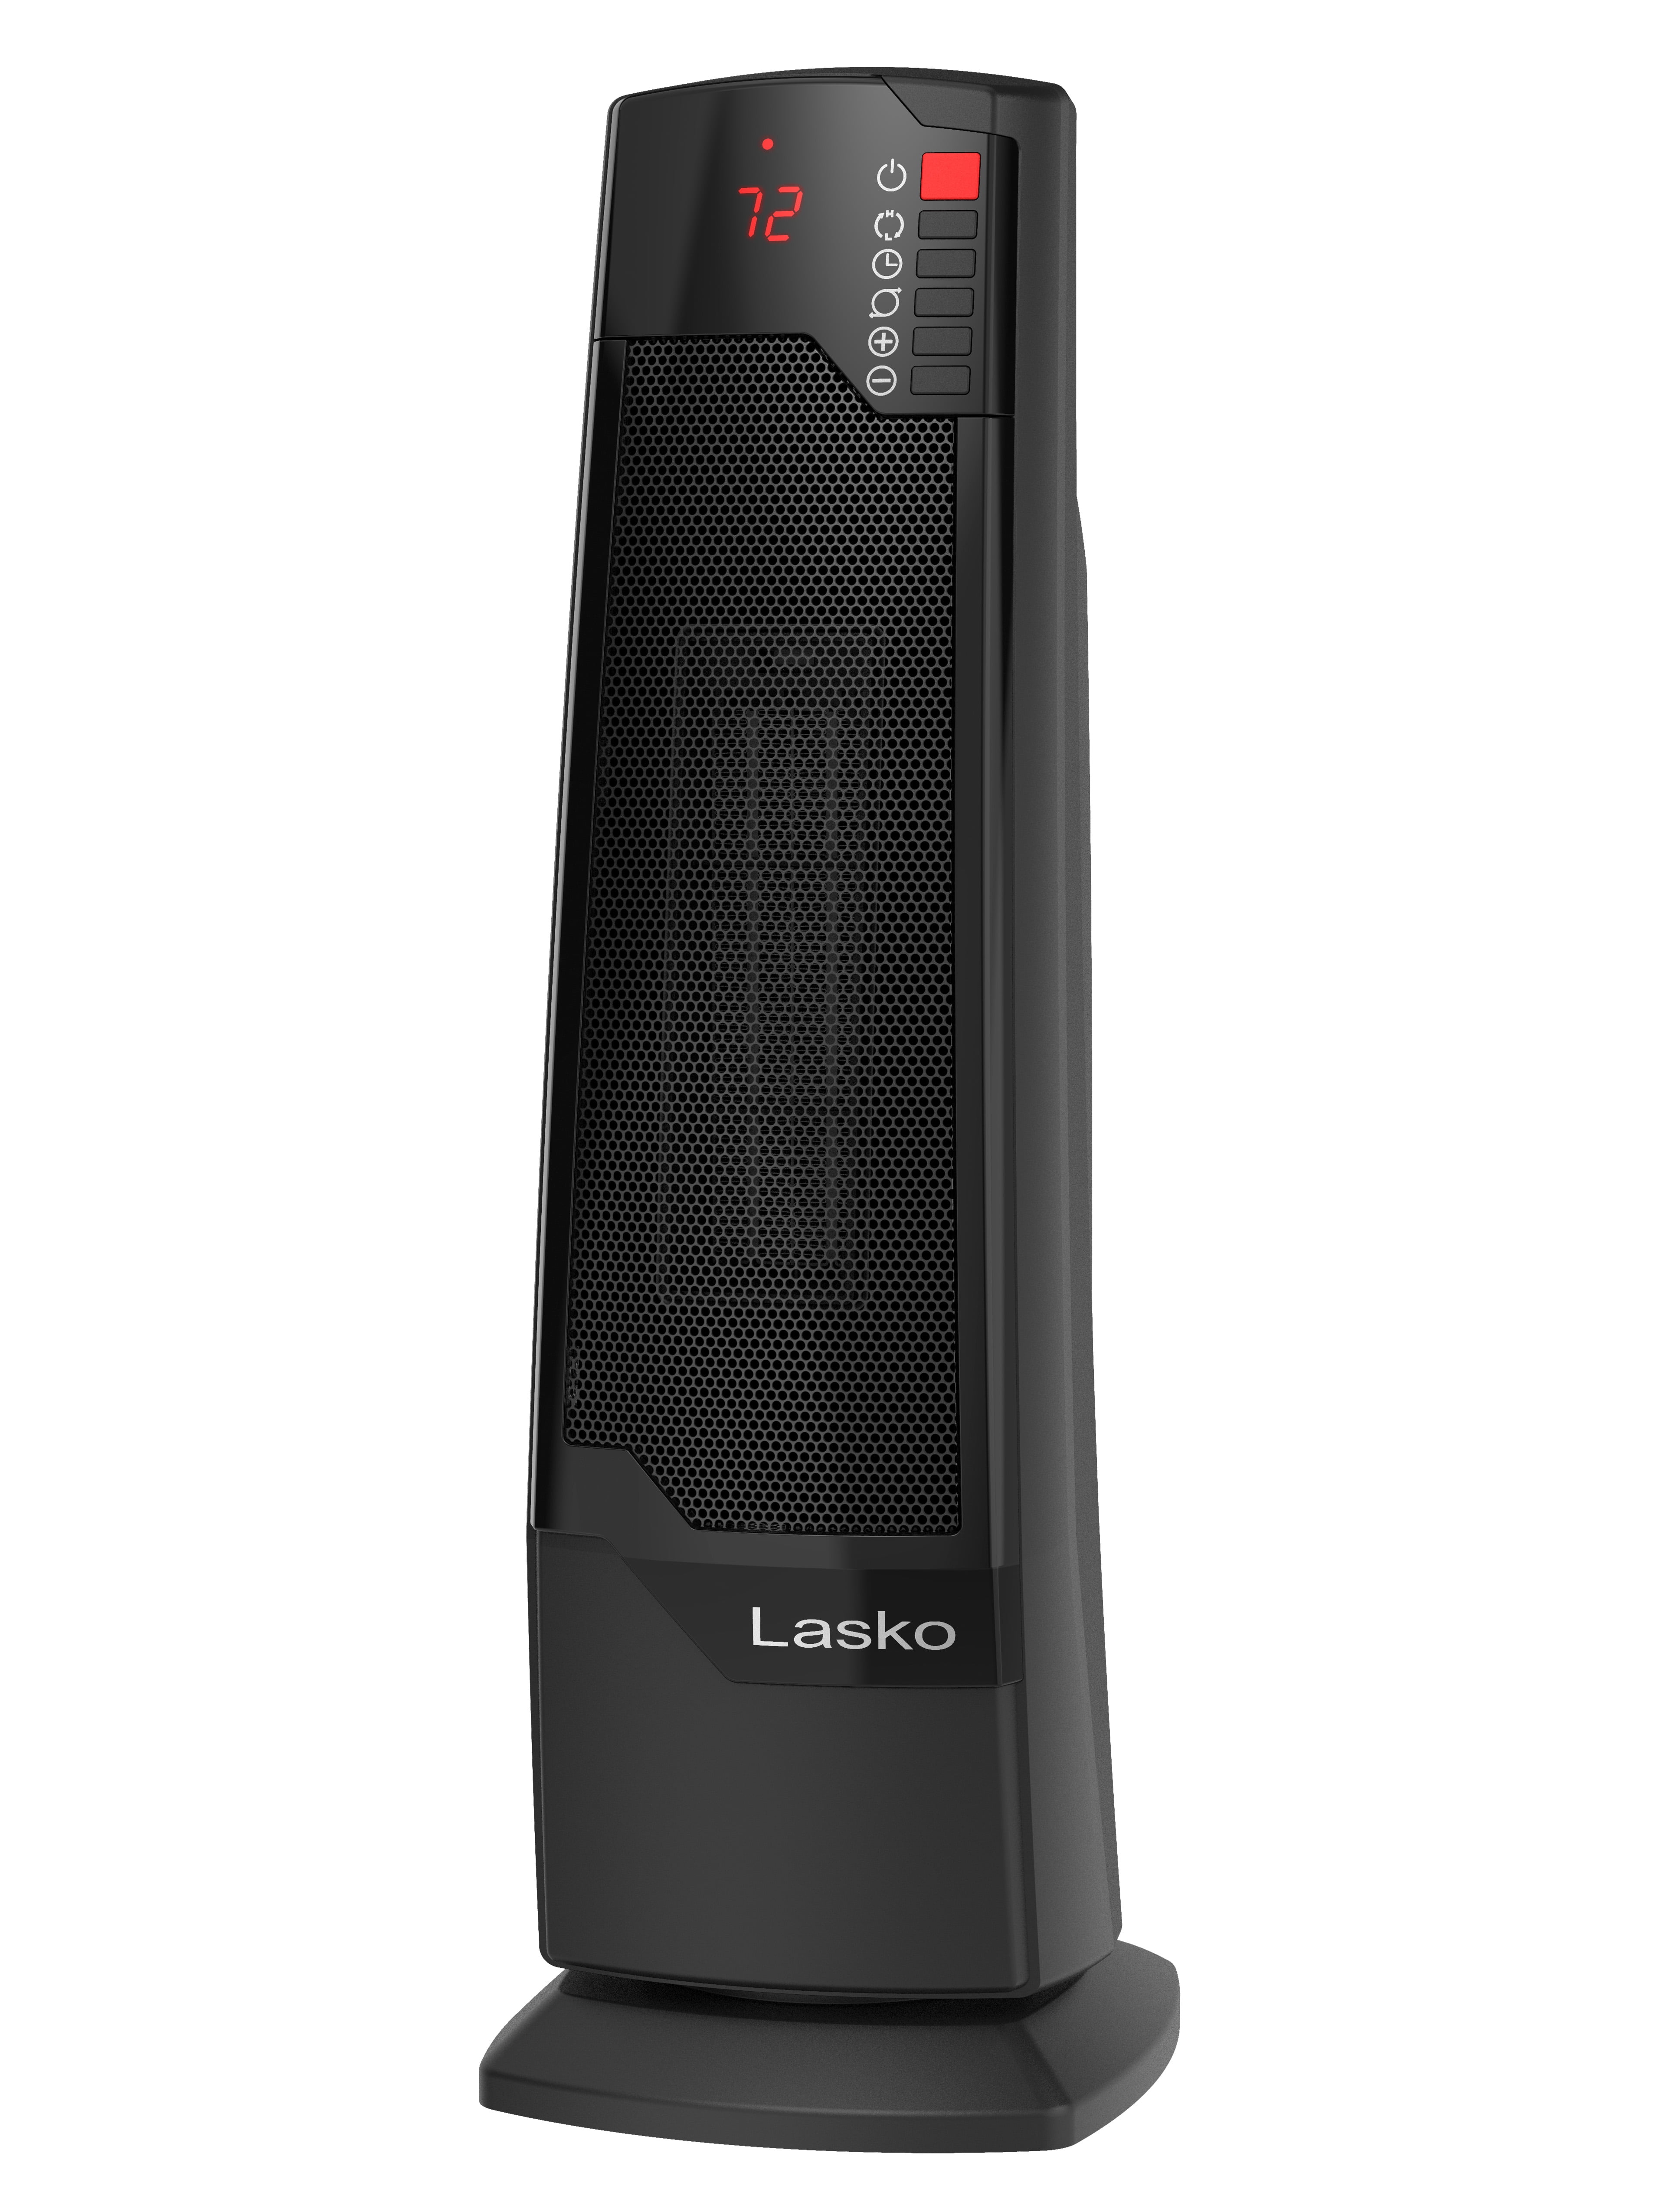 Lasko 1500W Oscillating Ceramic Tower Electric Space Heater with Remote Free Shipping $49.96